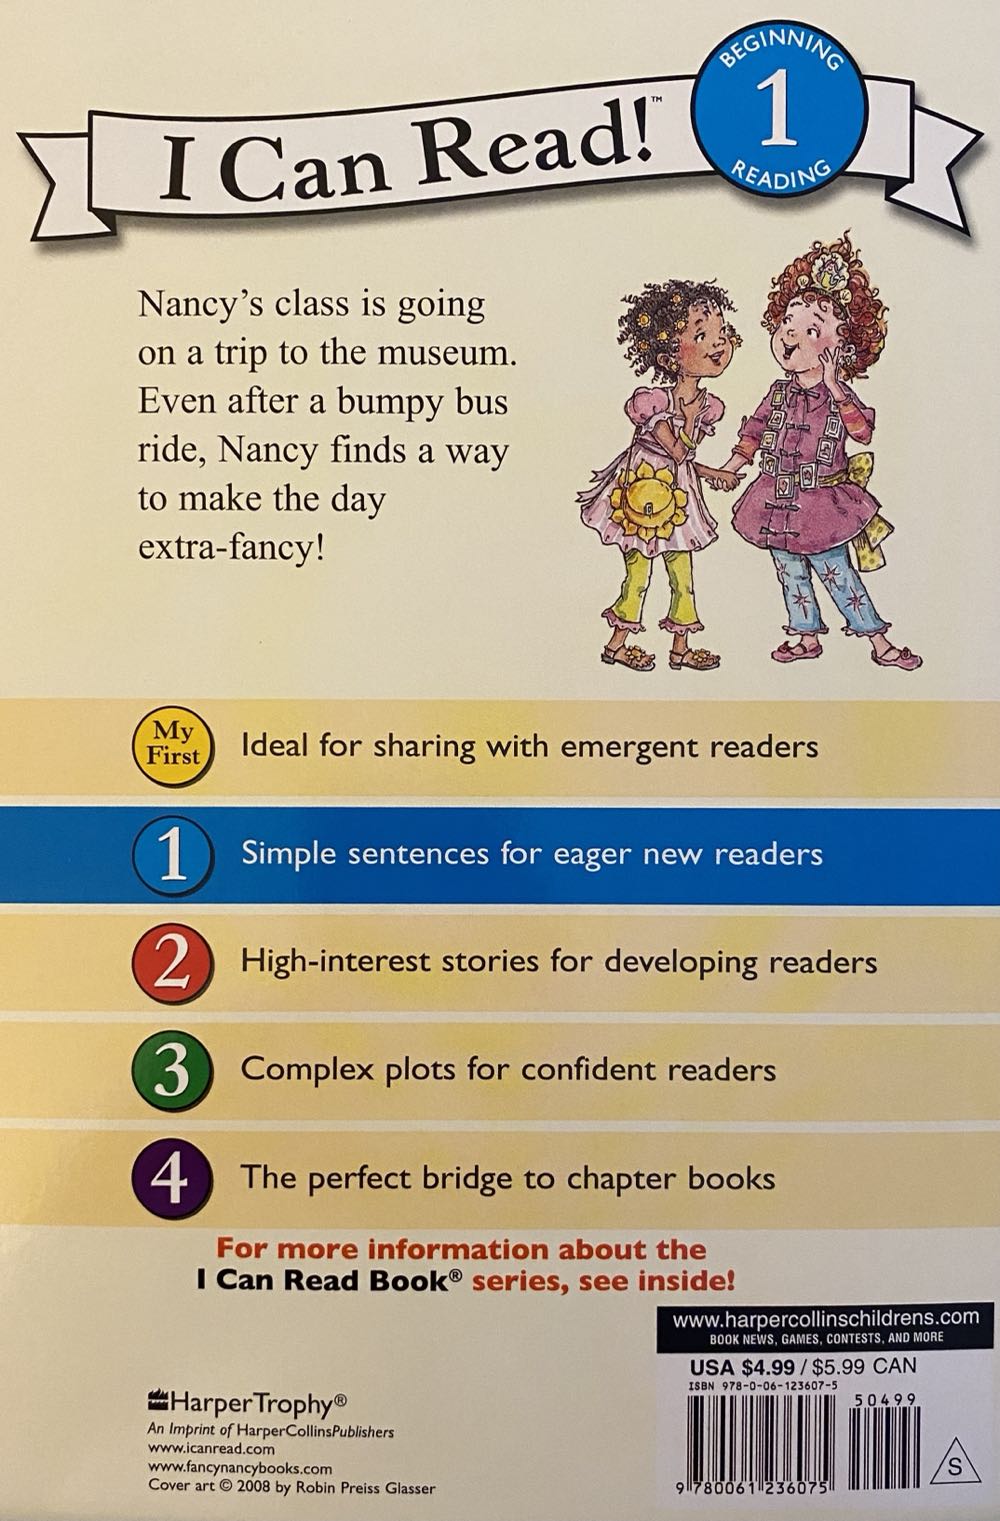 Fancy Nancy at the Museum (I Can Read Book 1) - Jane OâConnor (HarperCollins - Paperback) book collectible [Barcode 9780061236075] - Main Image 2